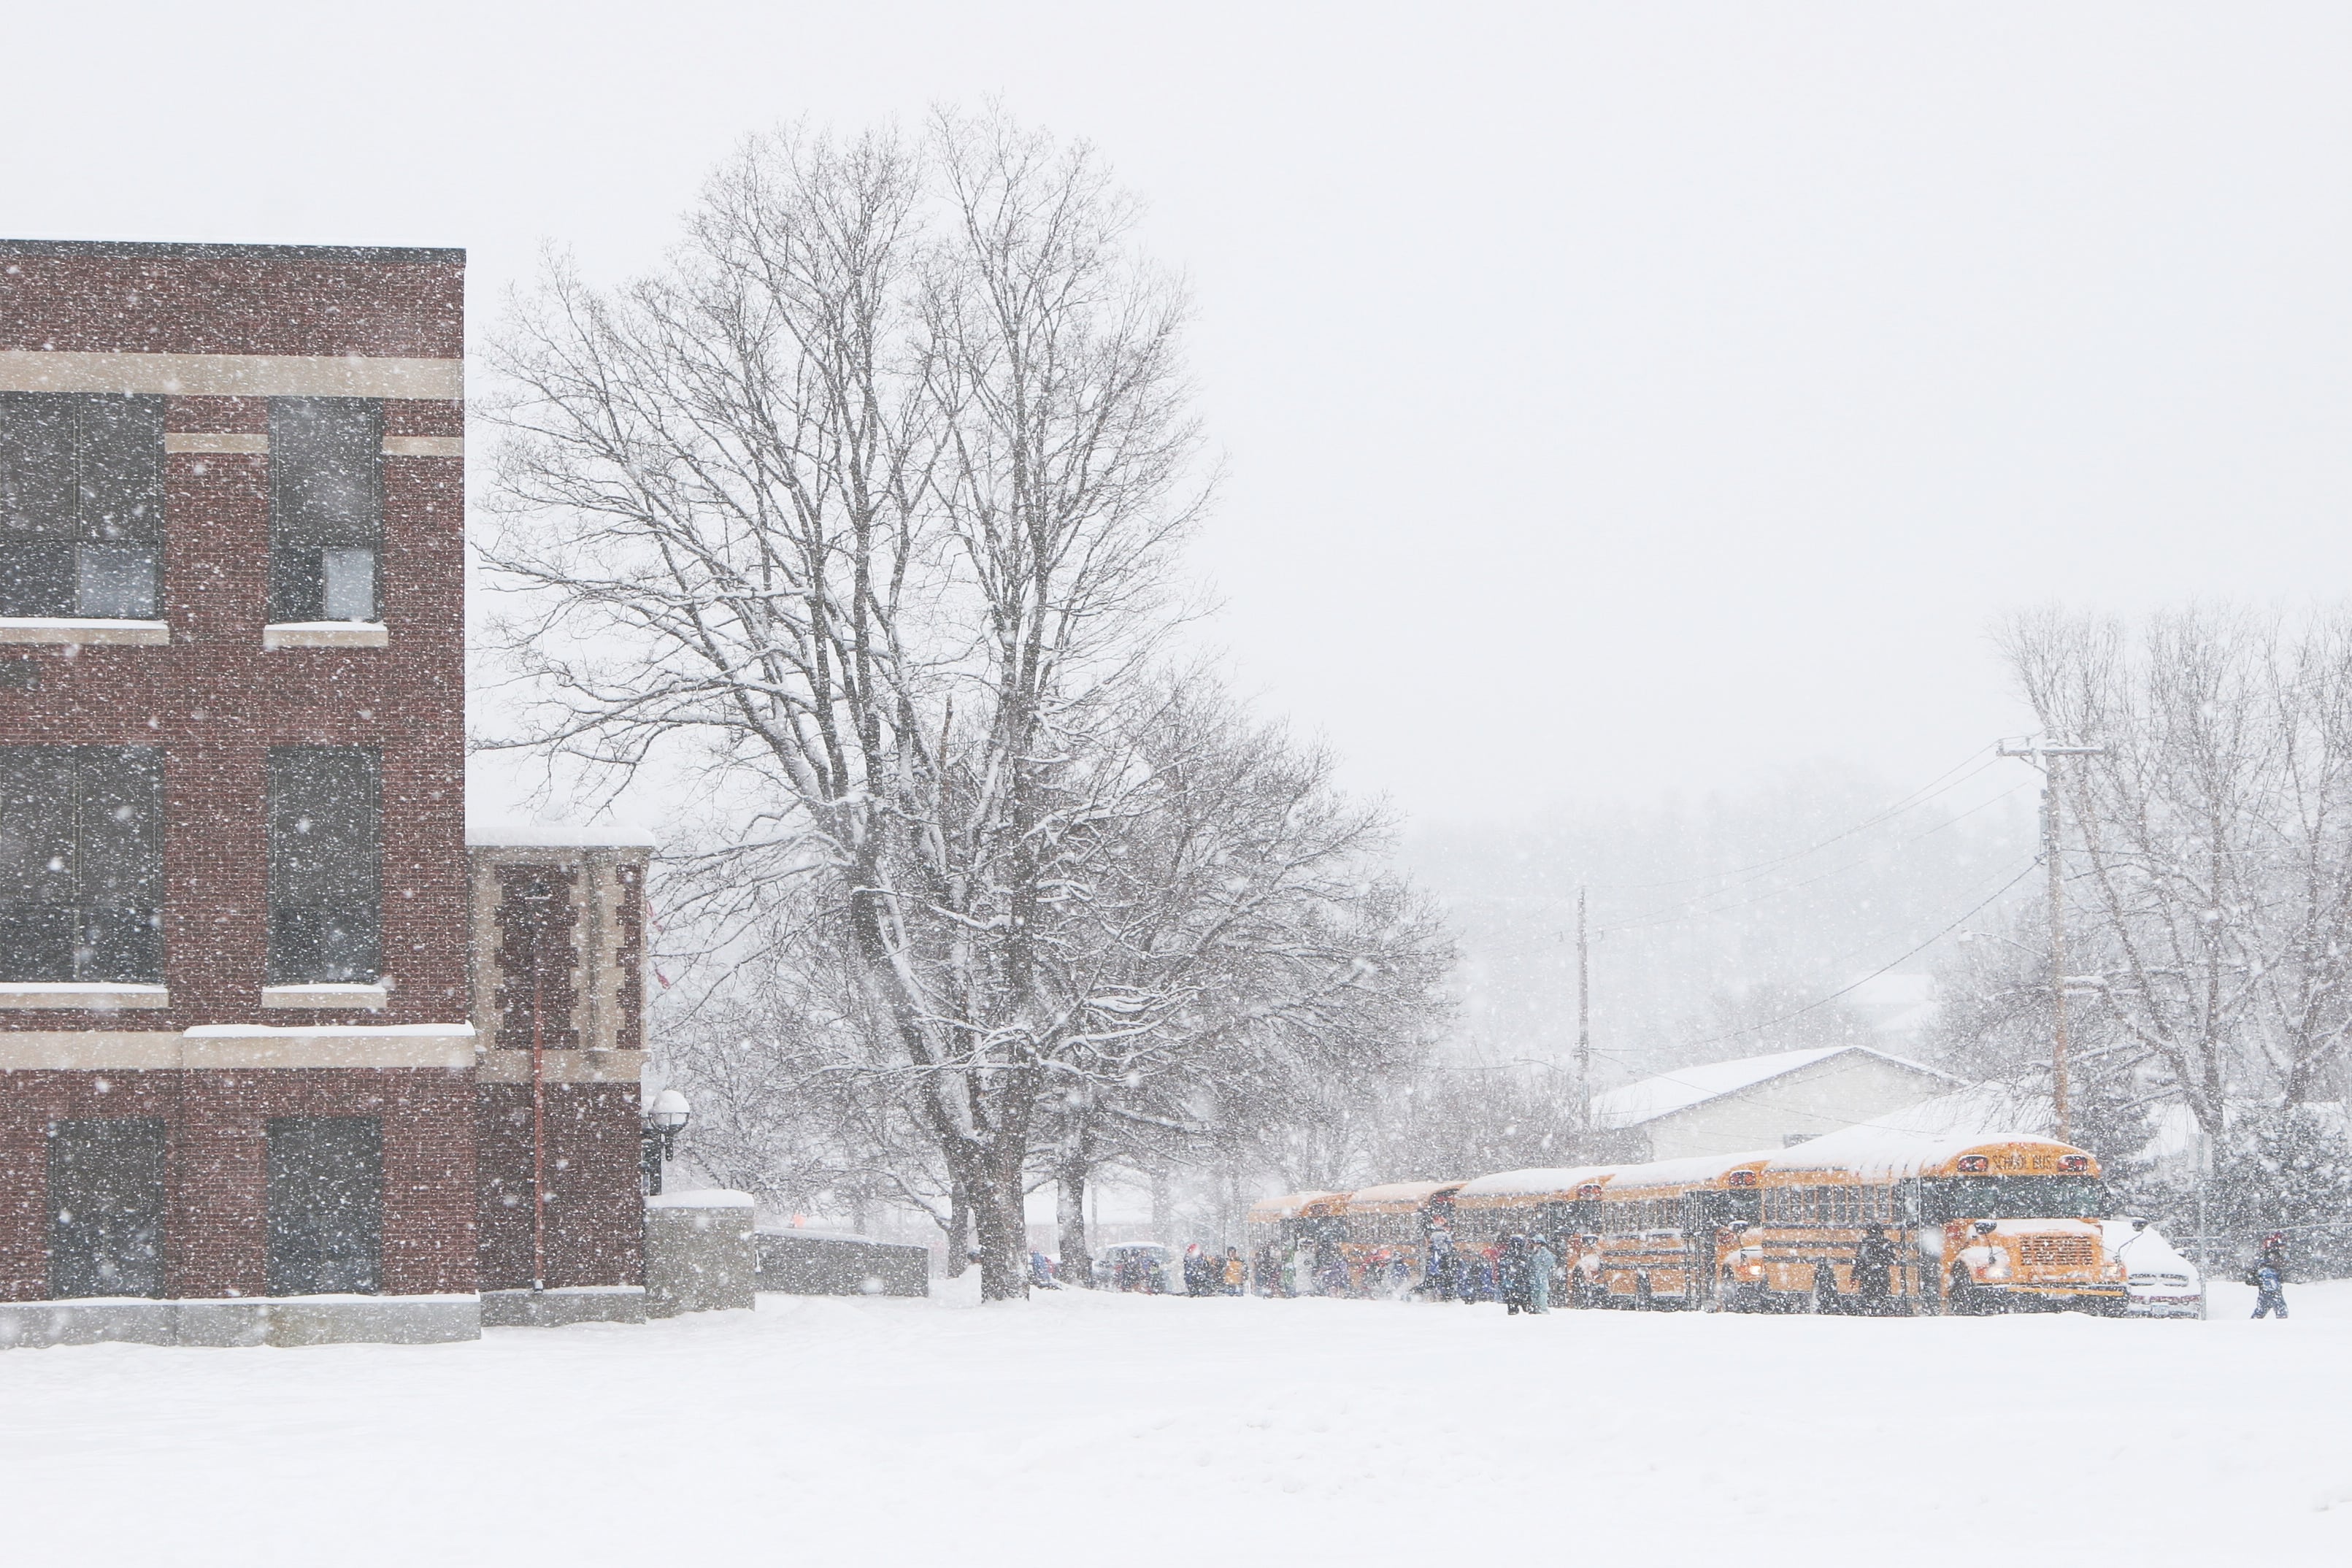 Yellow school buses line up outside a school as snow falls.